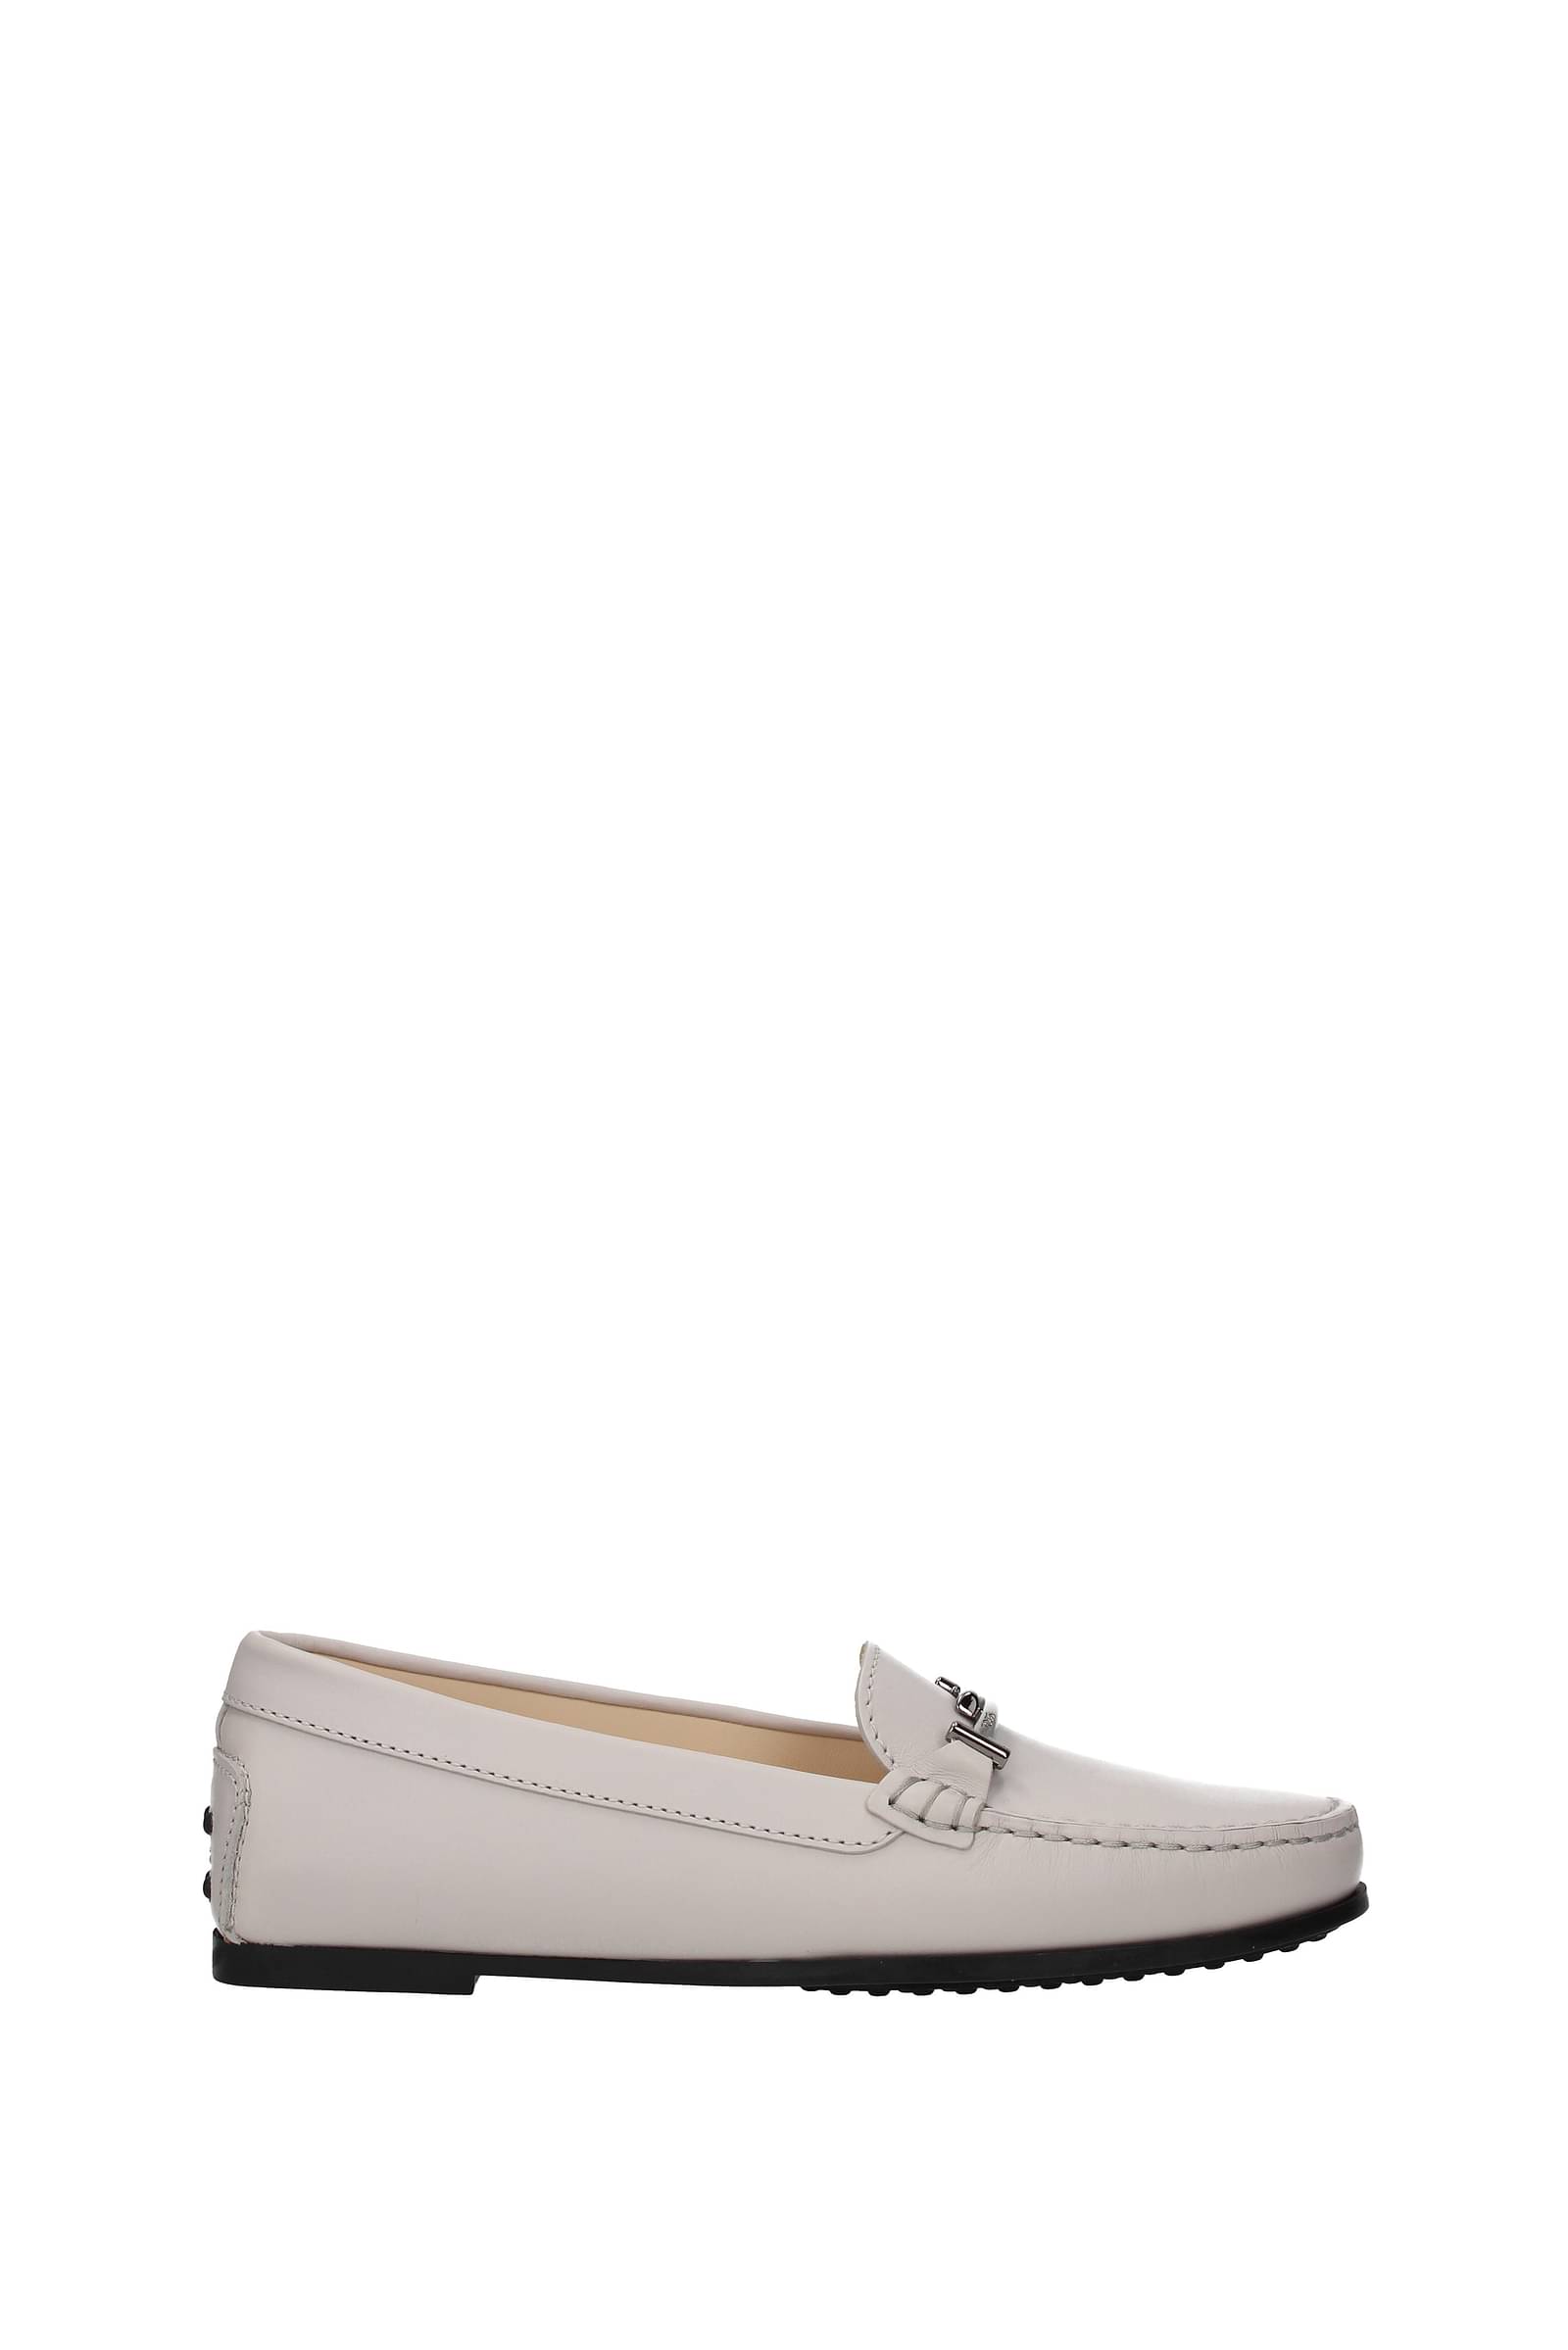 tods loafers womens sale